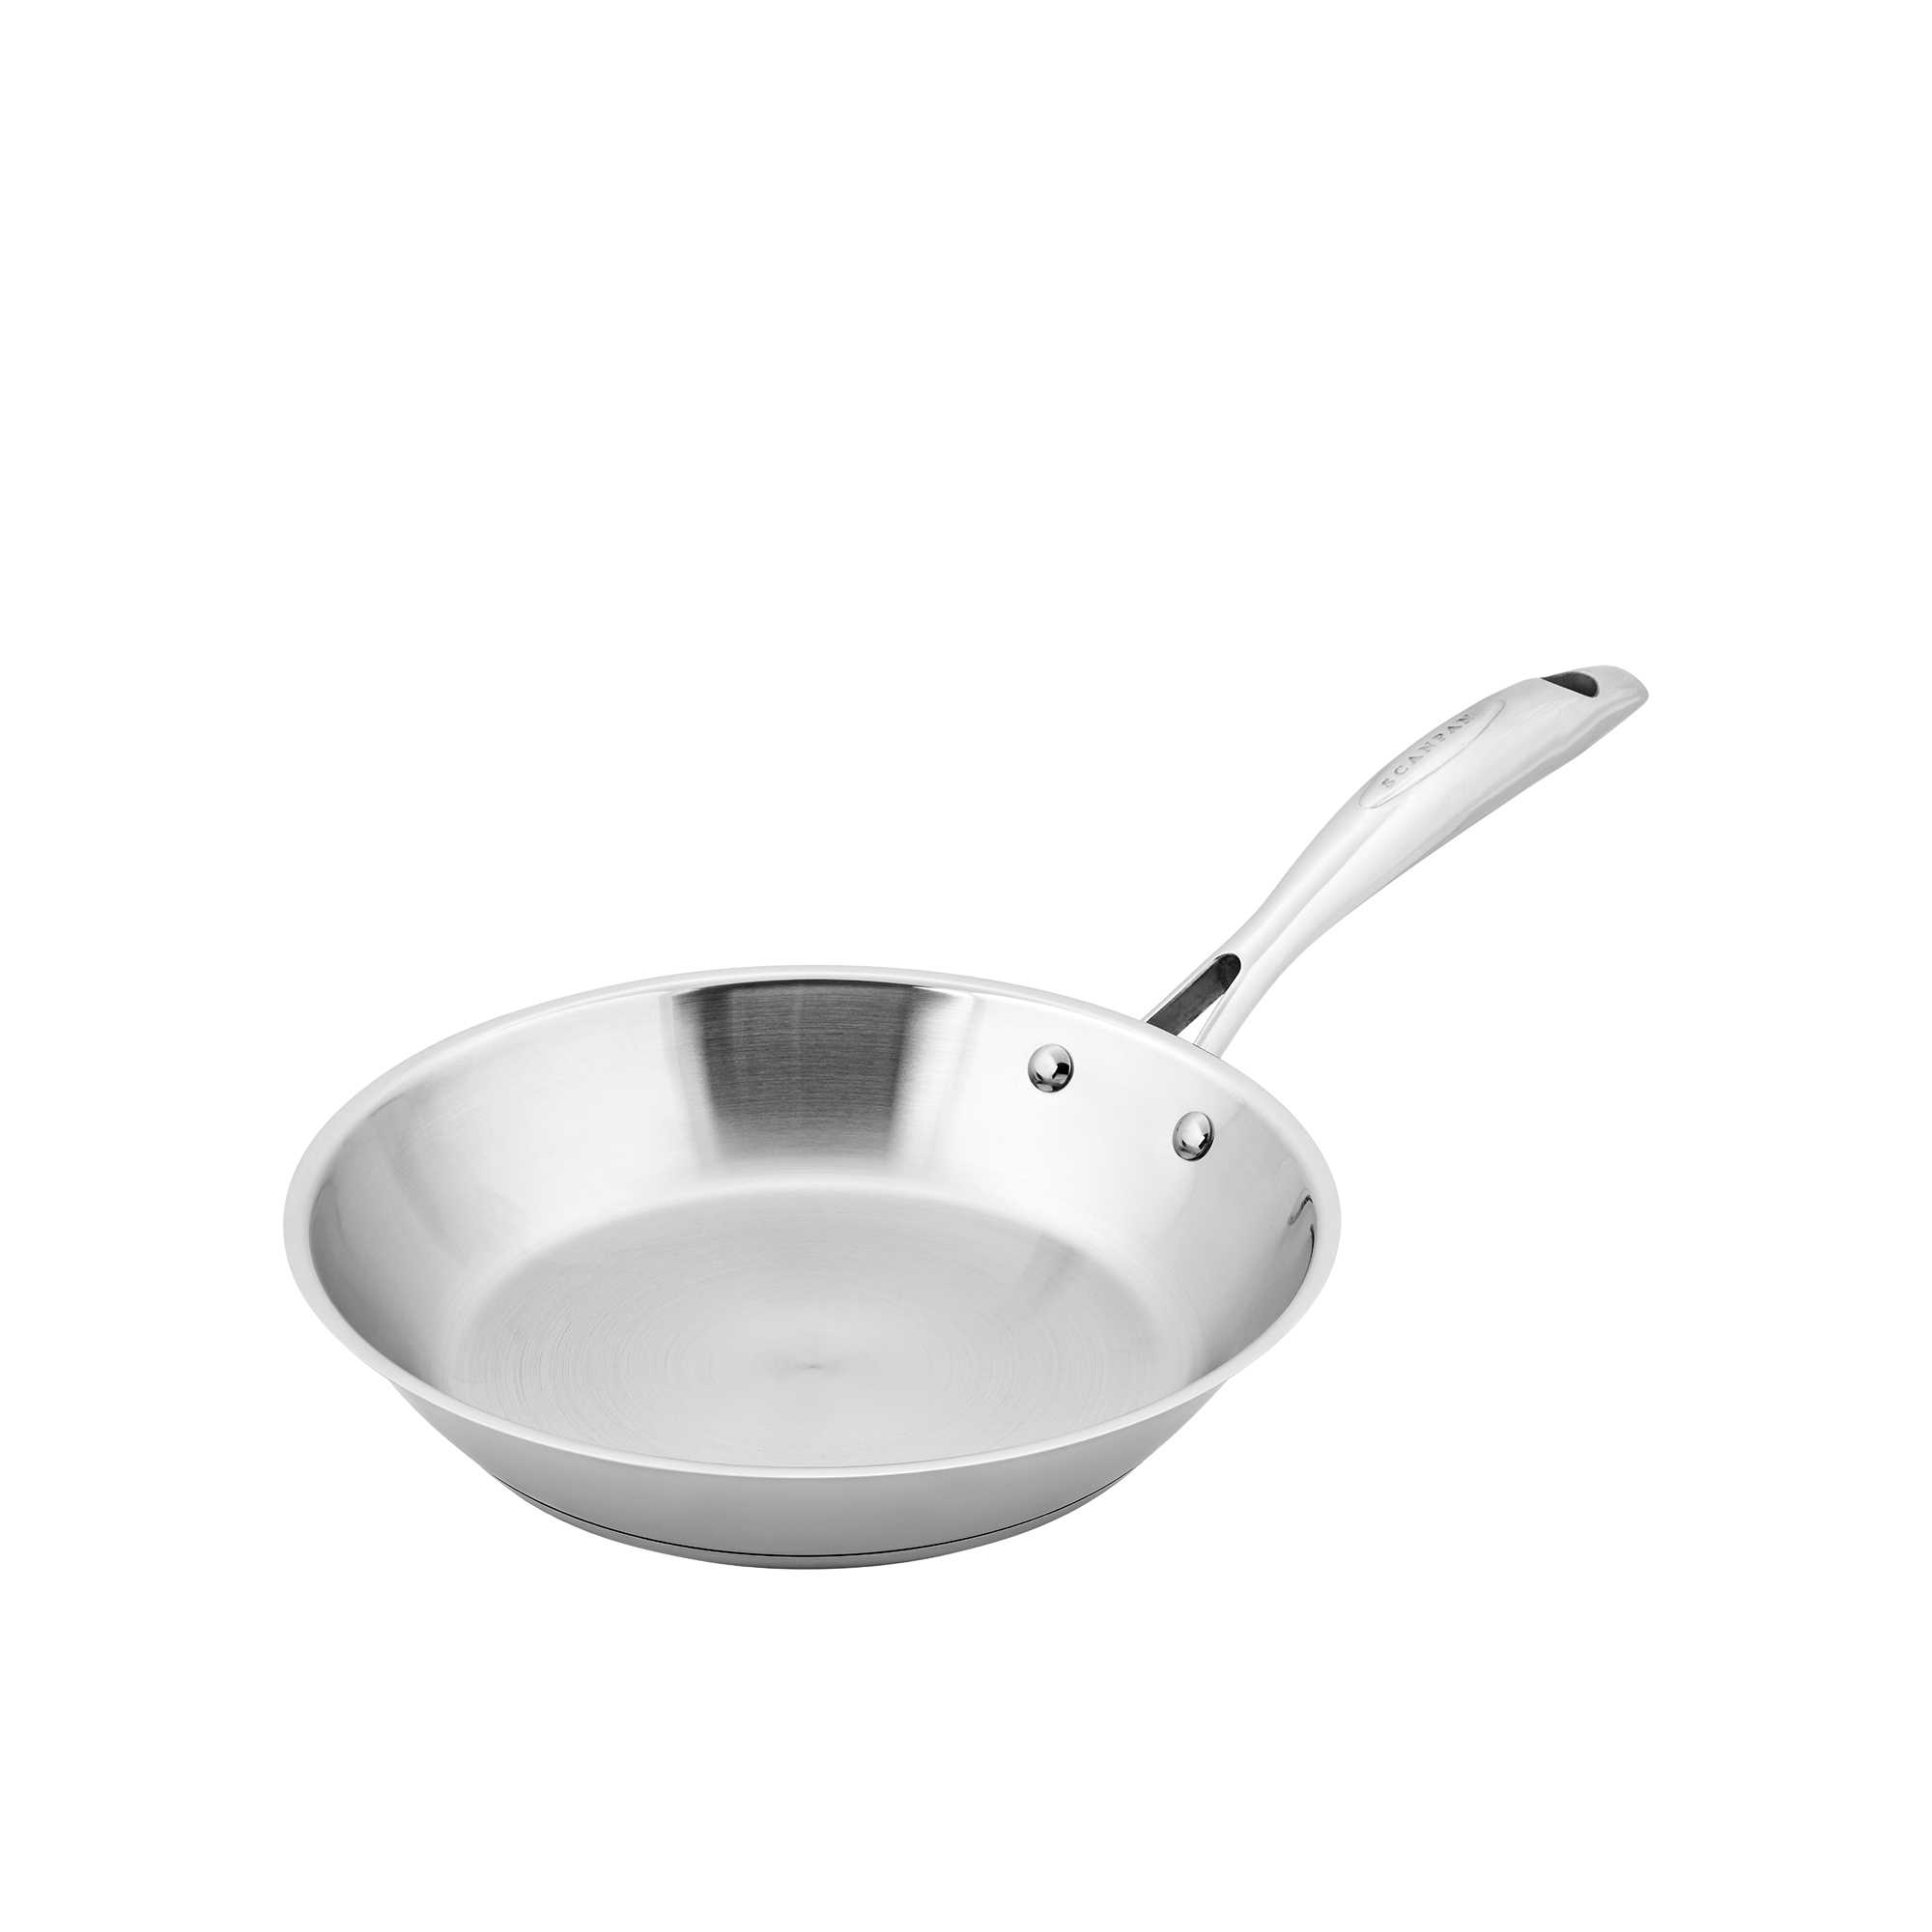 Scanpan STS Stainless Steel Frypan 24cm Image 1